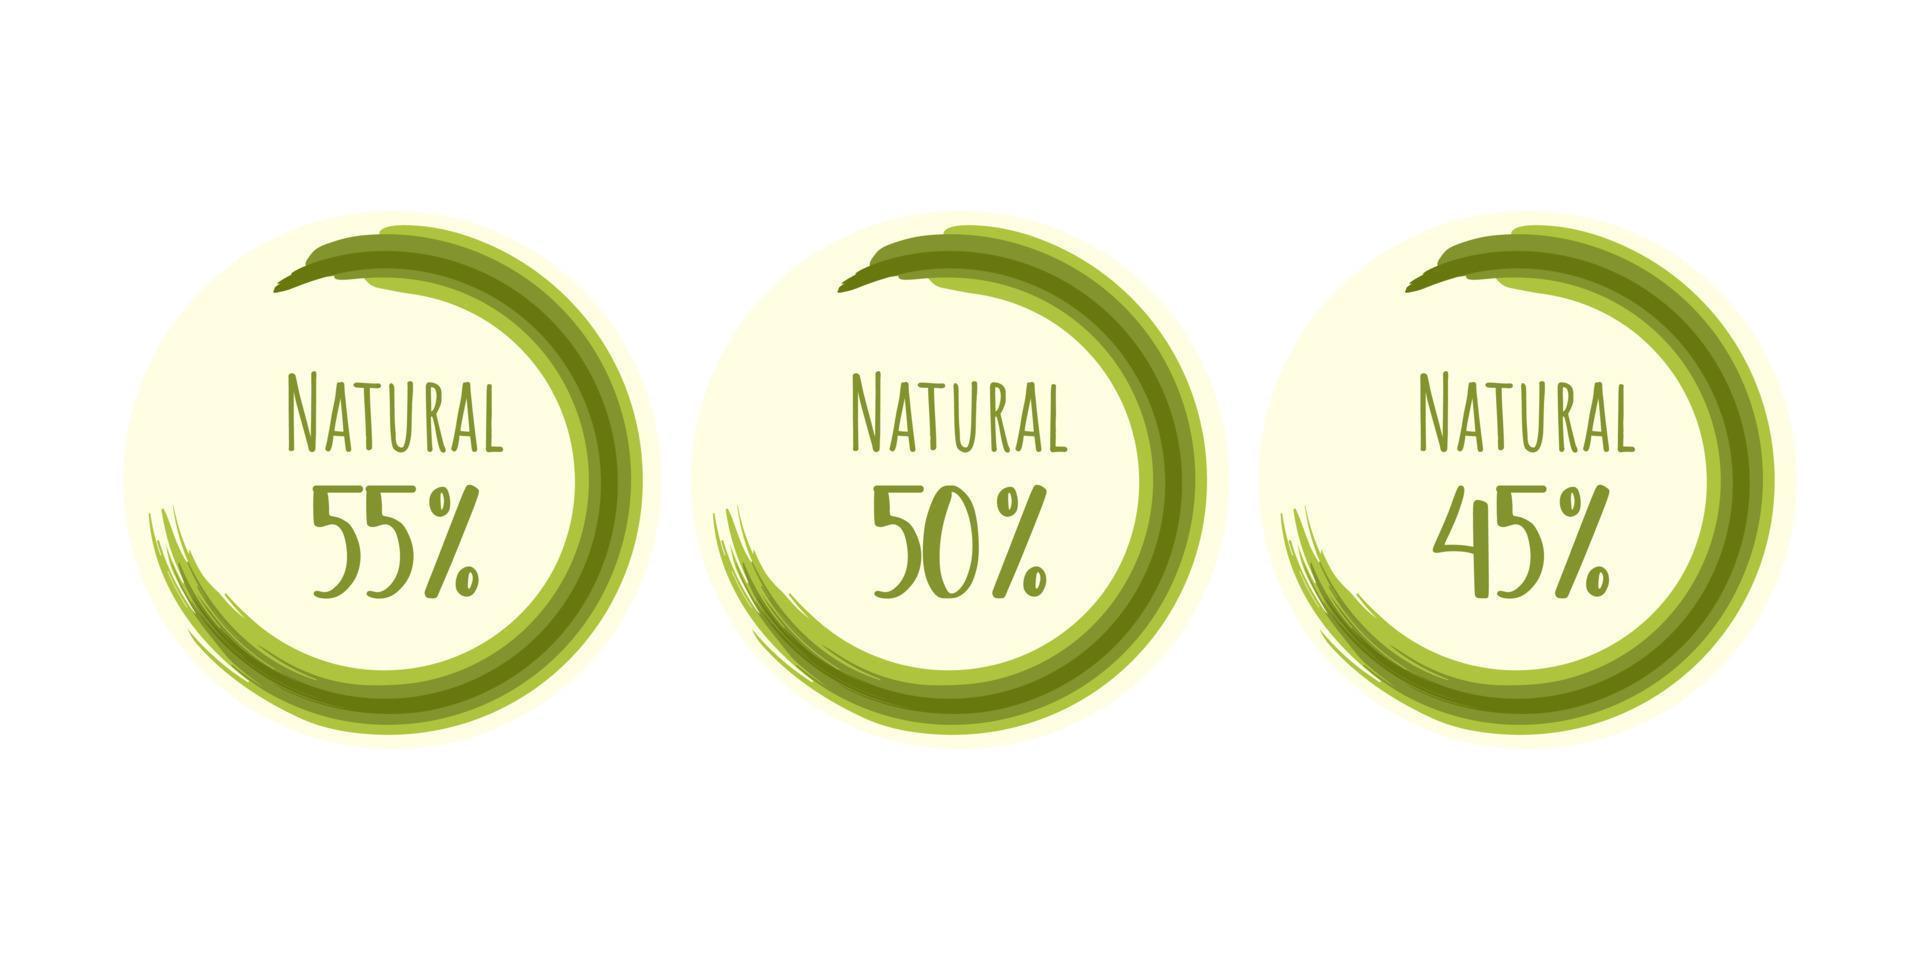 Natural Eco friendly stamp icons. Vector illustration with green circle authors brush, organic. Eco friendly sticker.